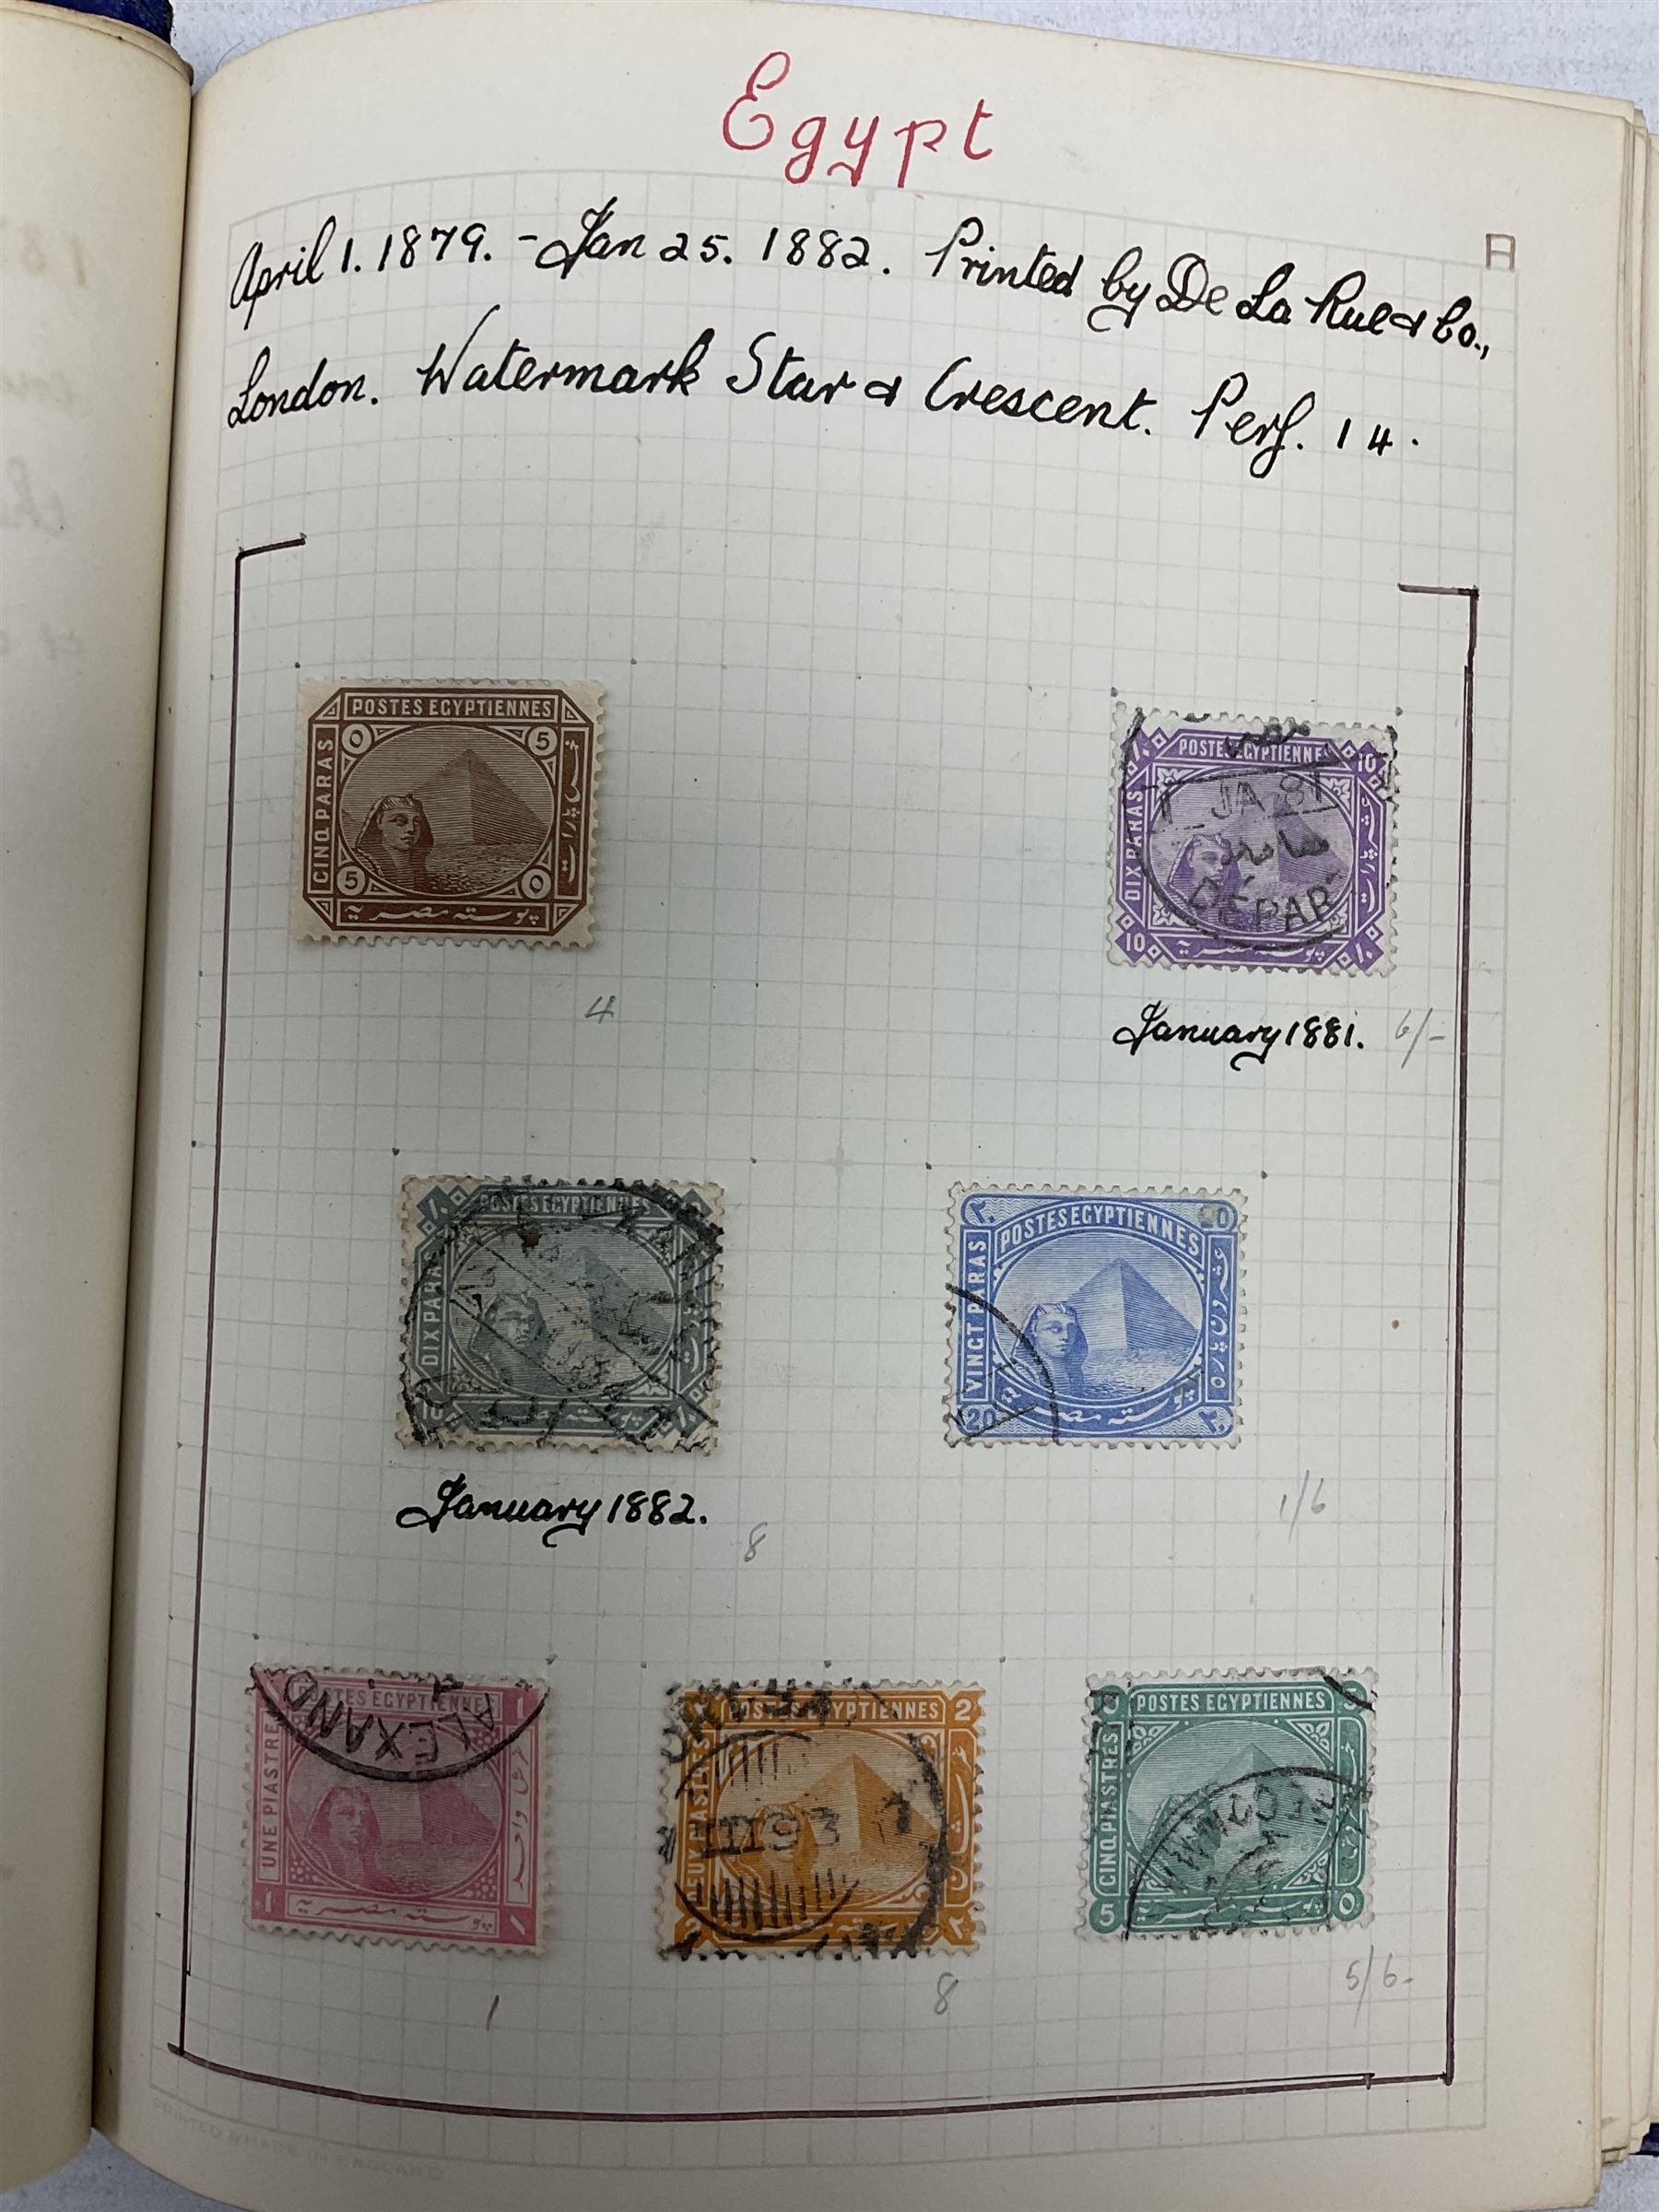 Egypt 1866 and later stamps - Image 680 of 761